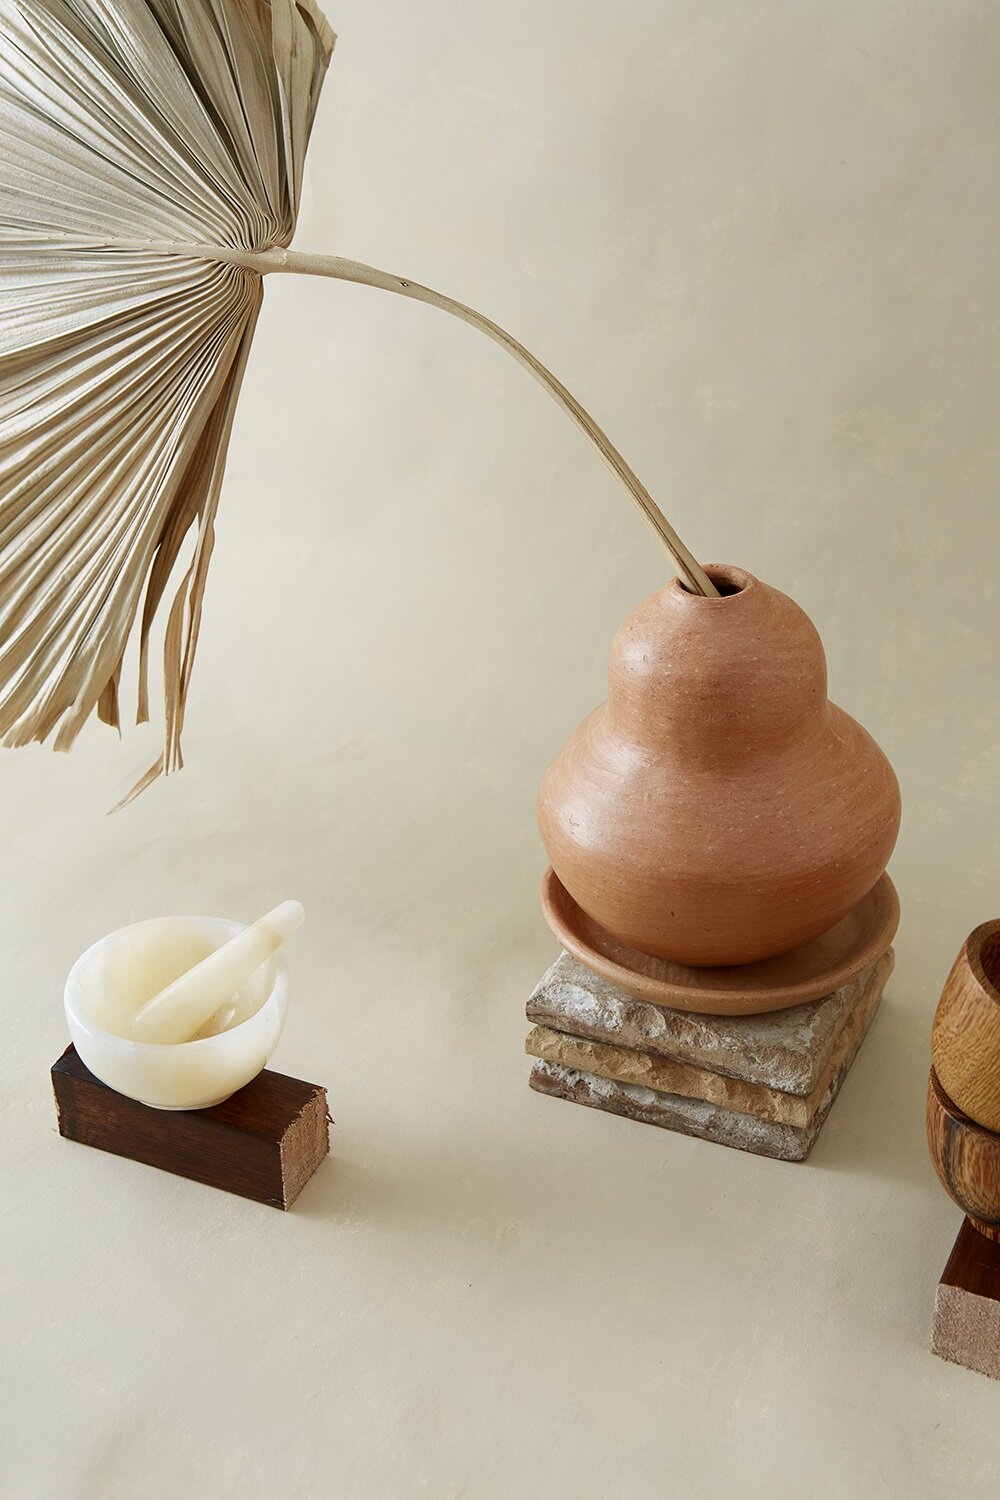 Artisan & Fox - Home Goods - QUEMAR Bud Vase in Natural Unglazed - Handcrafted in Mexico